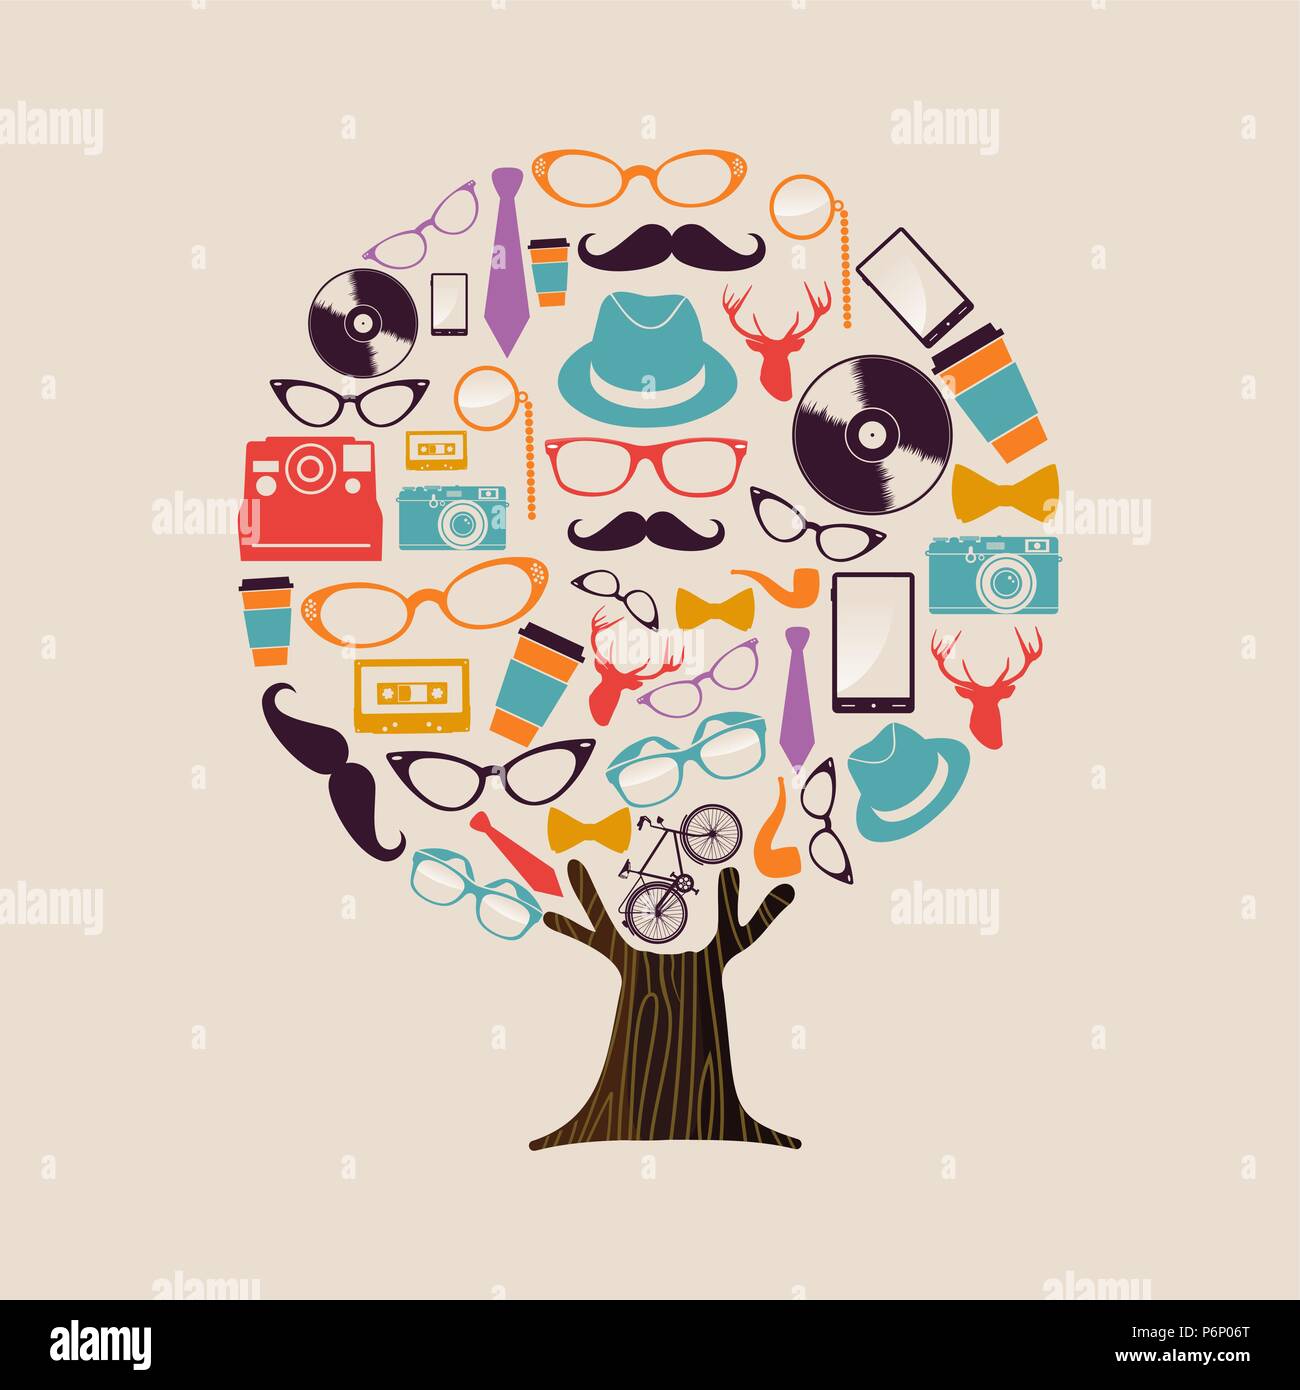 Hipster fashion tree made of retro style icons. Vintage culture concept includes deer, glasses, photgraphy camera and mustache. EPS10 vector. Stock Vector